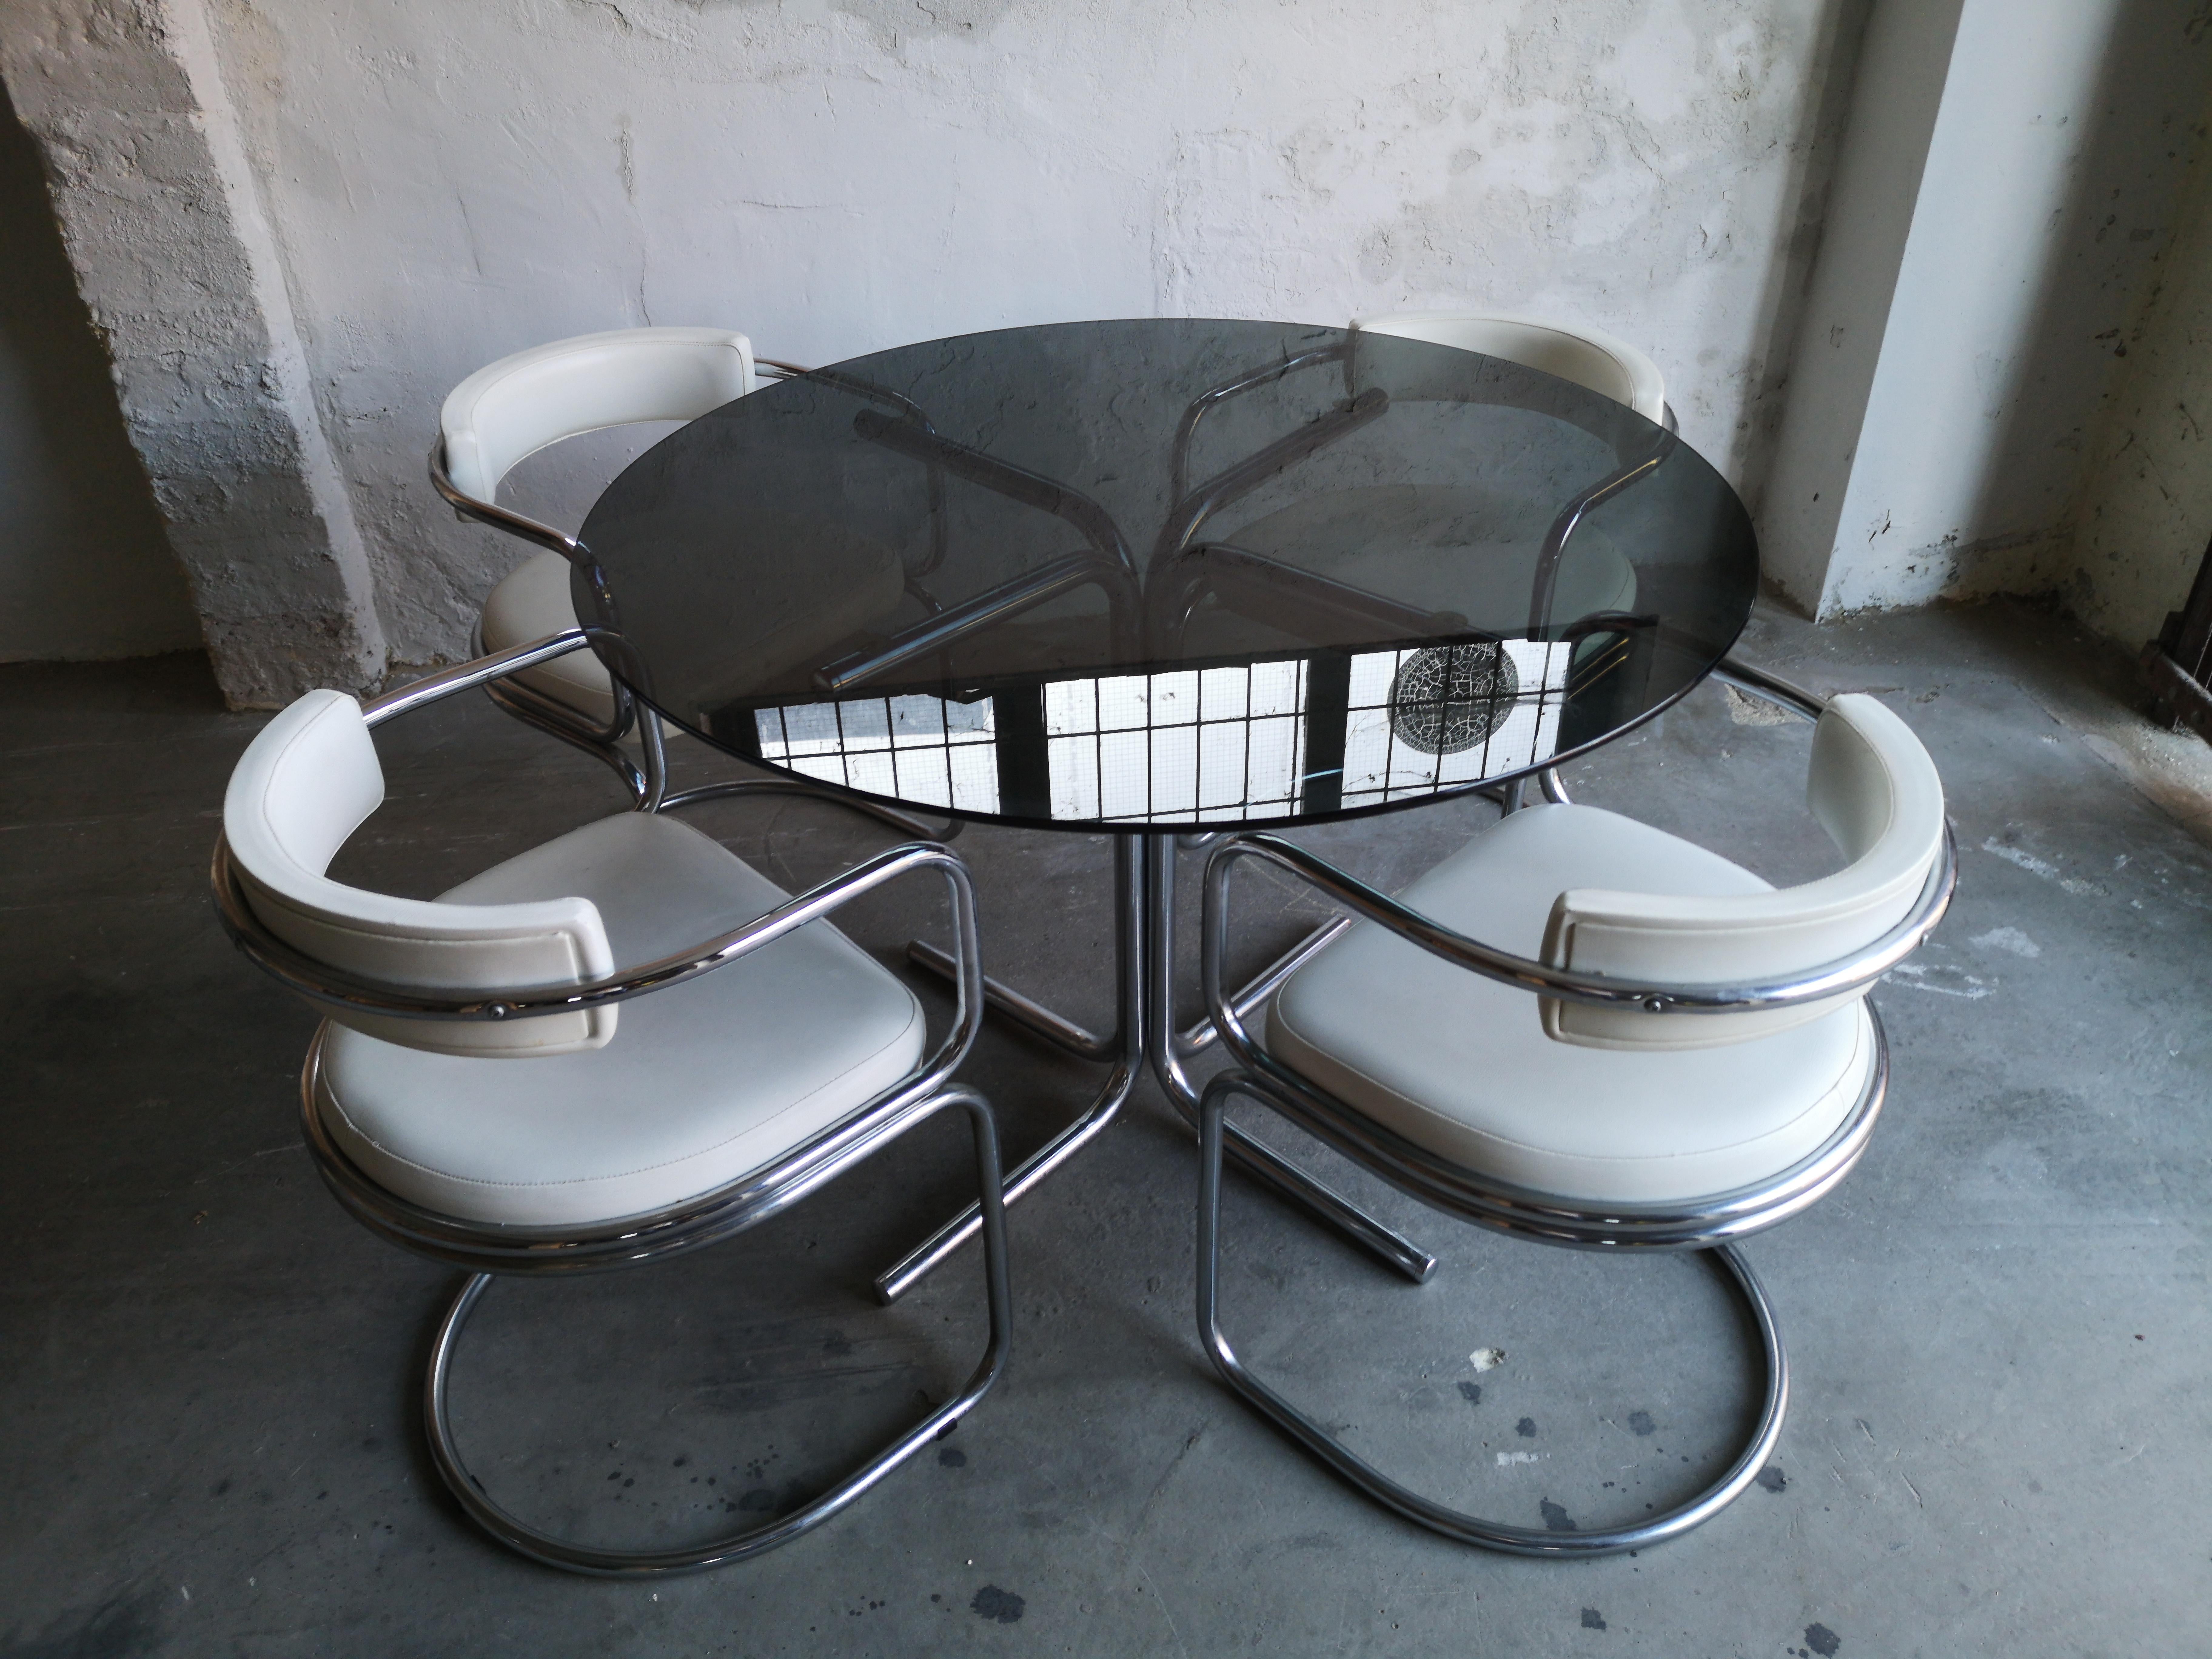 A lovely vintage tubular chrome and smoked glass dining set from circa 1970s. Very good vintage condition. All 4 chairs have original white vinyl upholstery with no rips or tears. There are hardly any signs of use on the glass top.